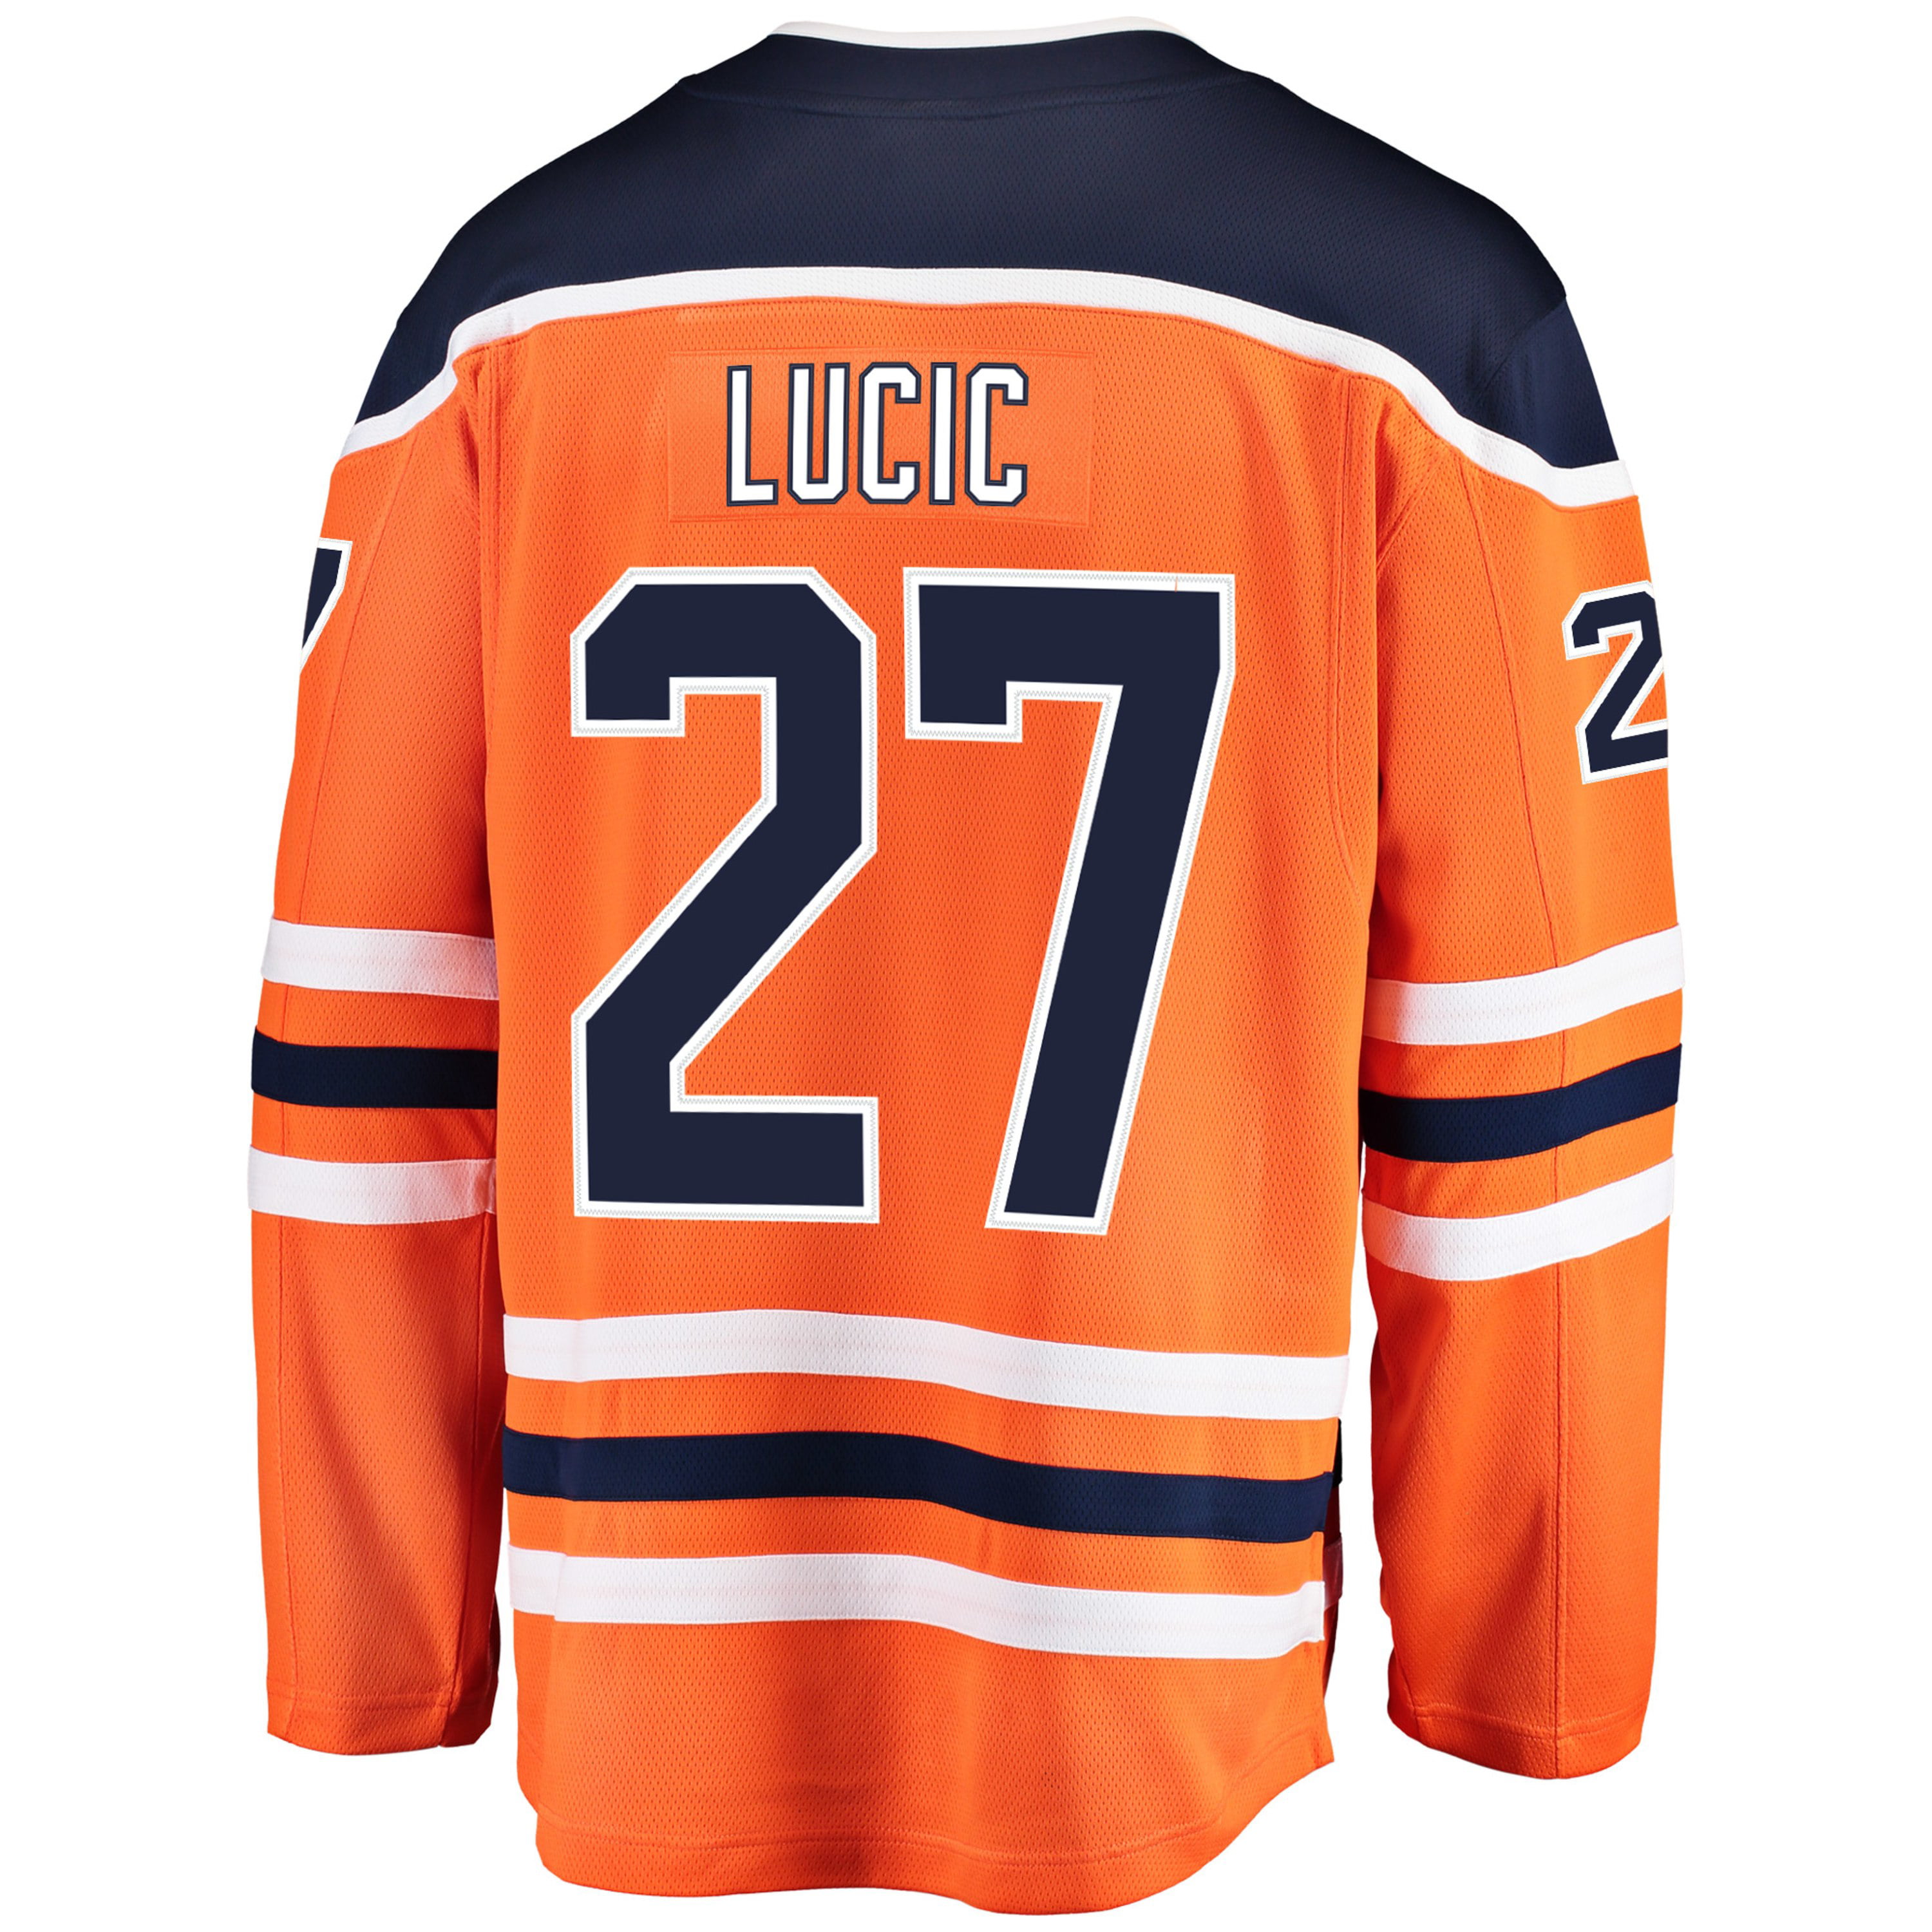 lucic jersey